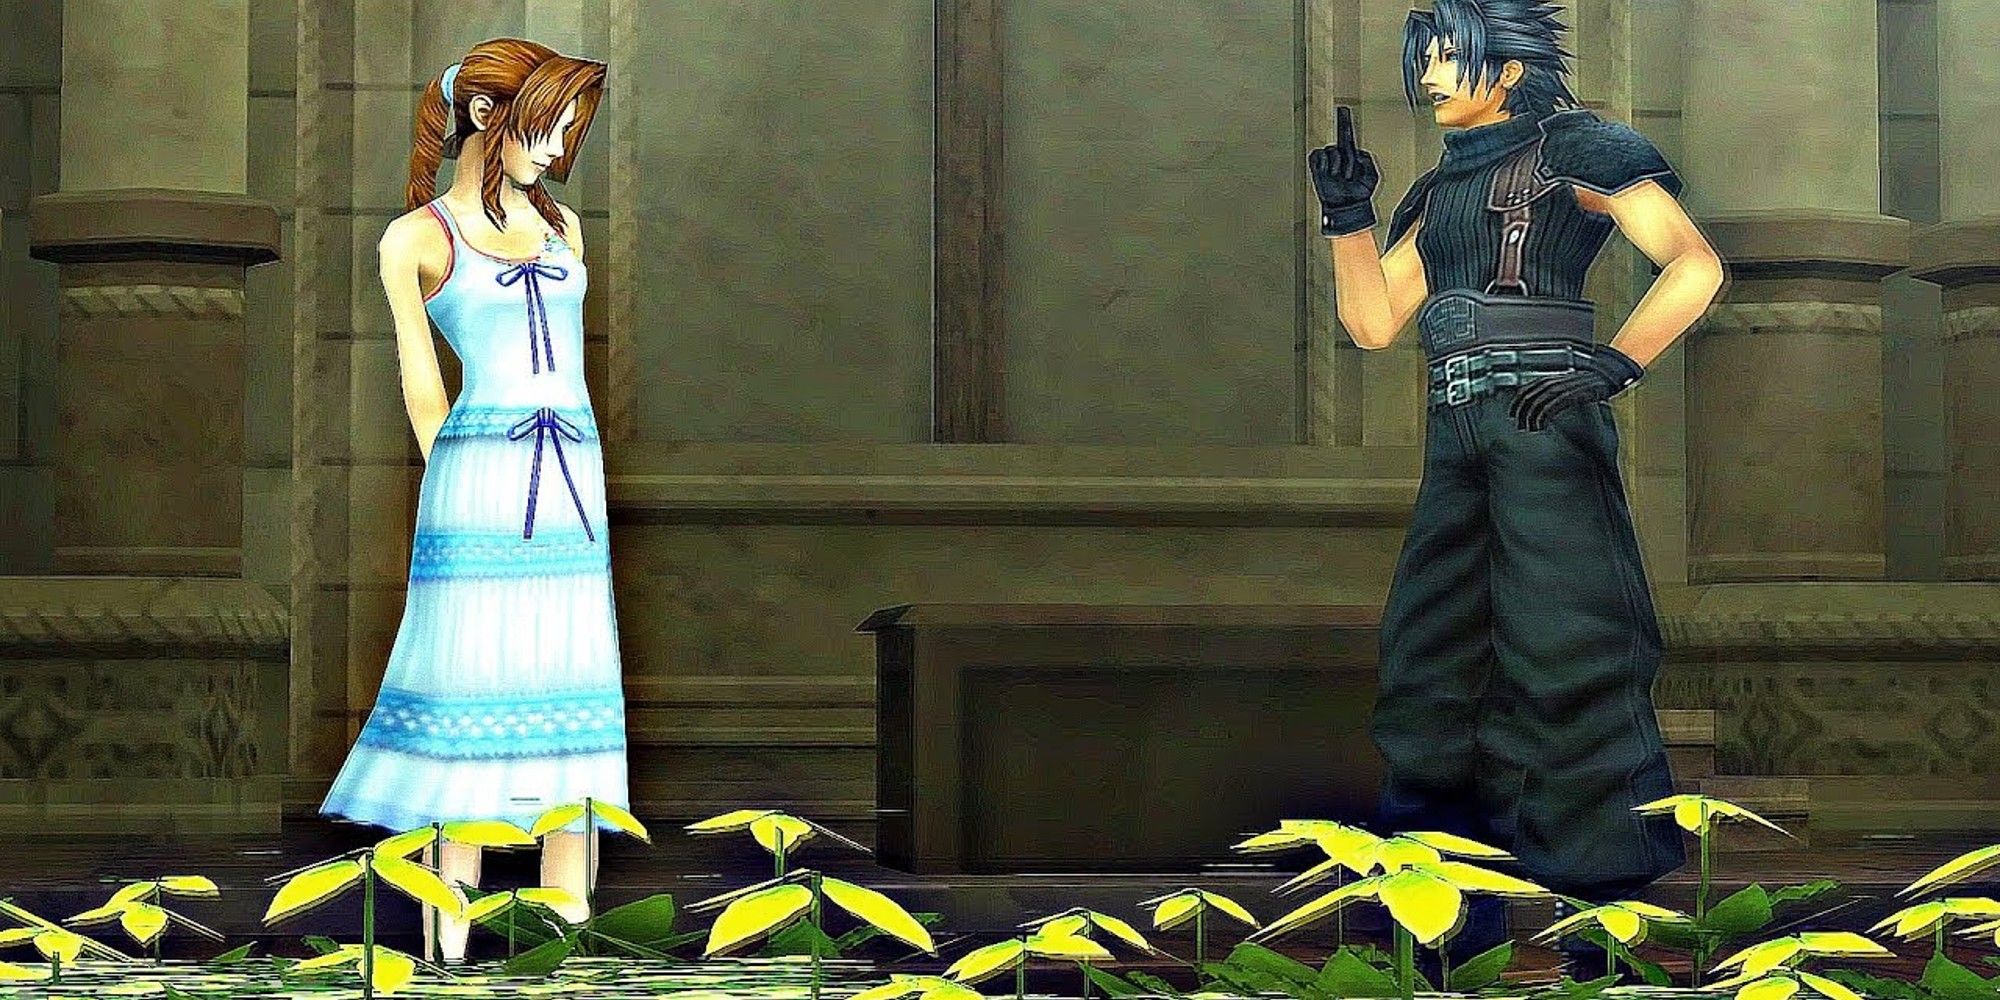 CCFF7 Zack Aerith talking while standing in flowers